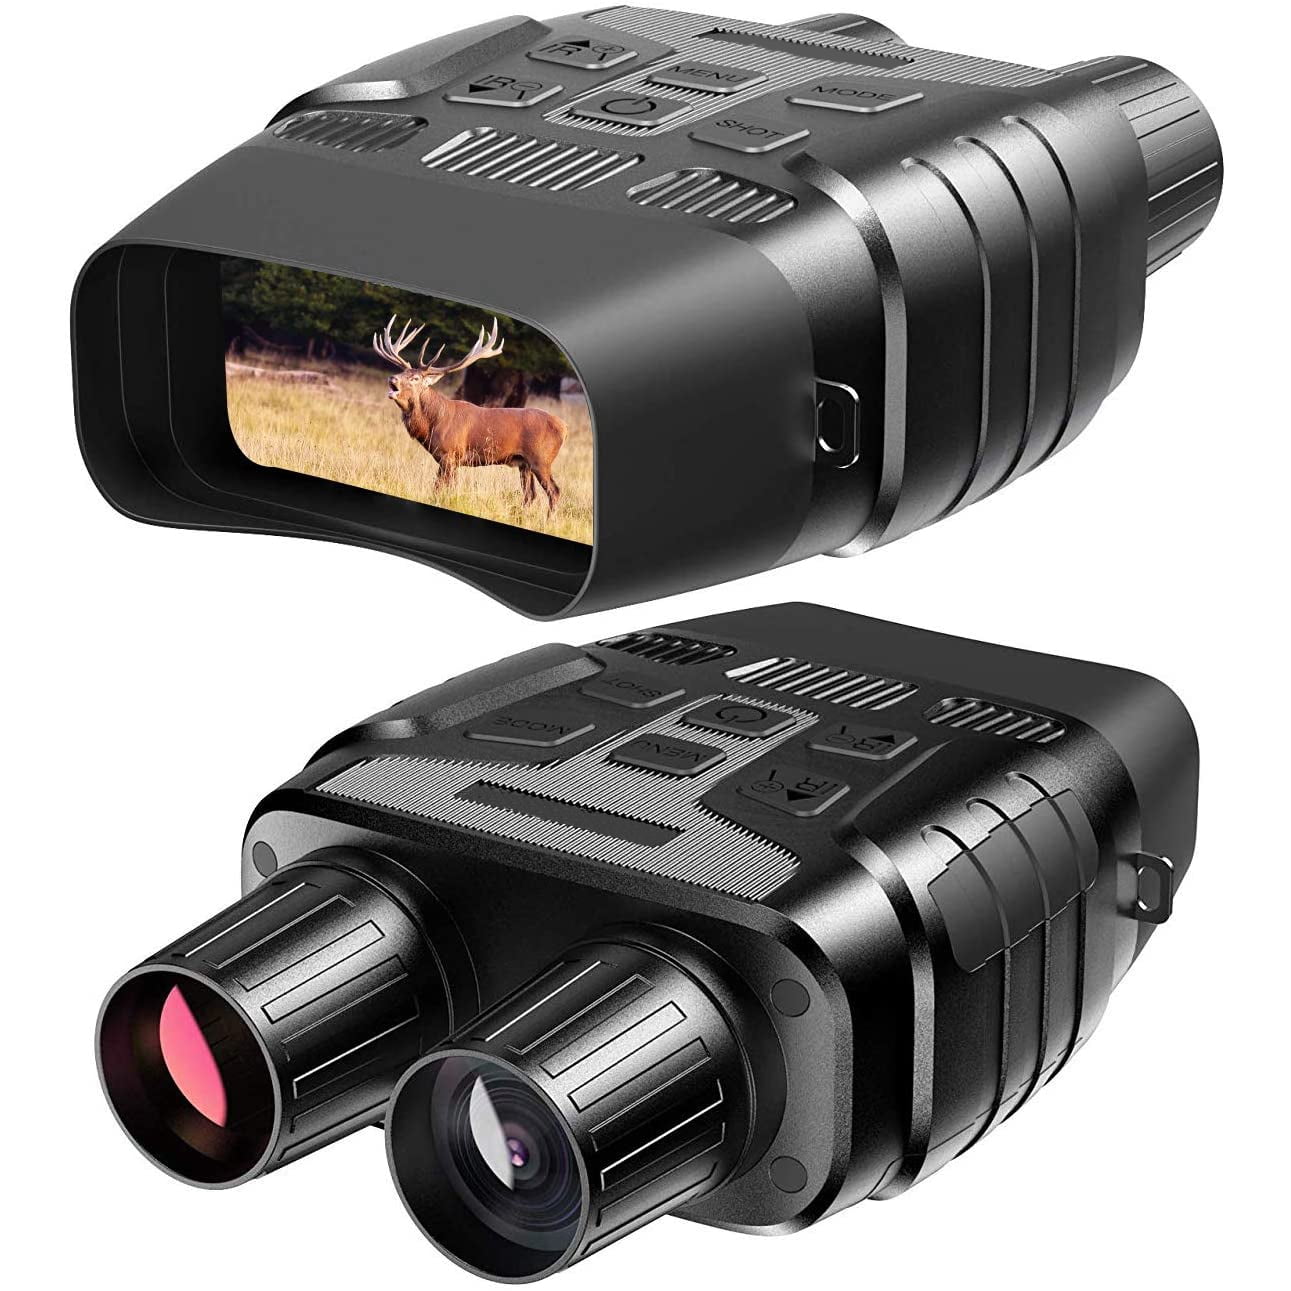 Digital Night Vision Goggles Binoculars Complete Darkness Infrared Scope  for Hunting and Surveillance - Walmart.com